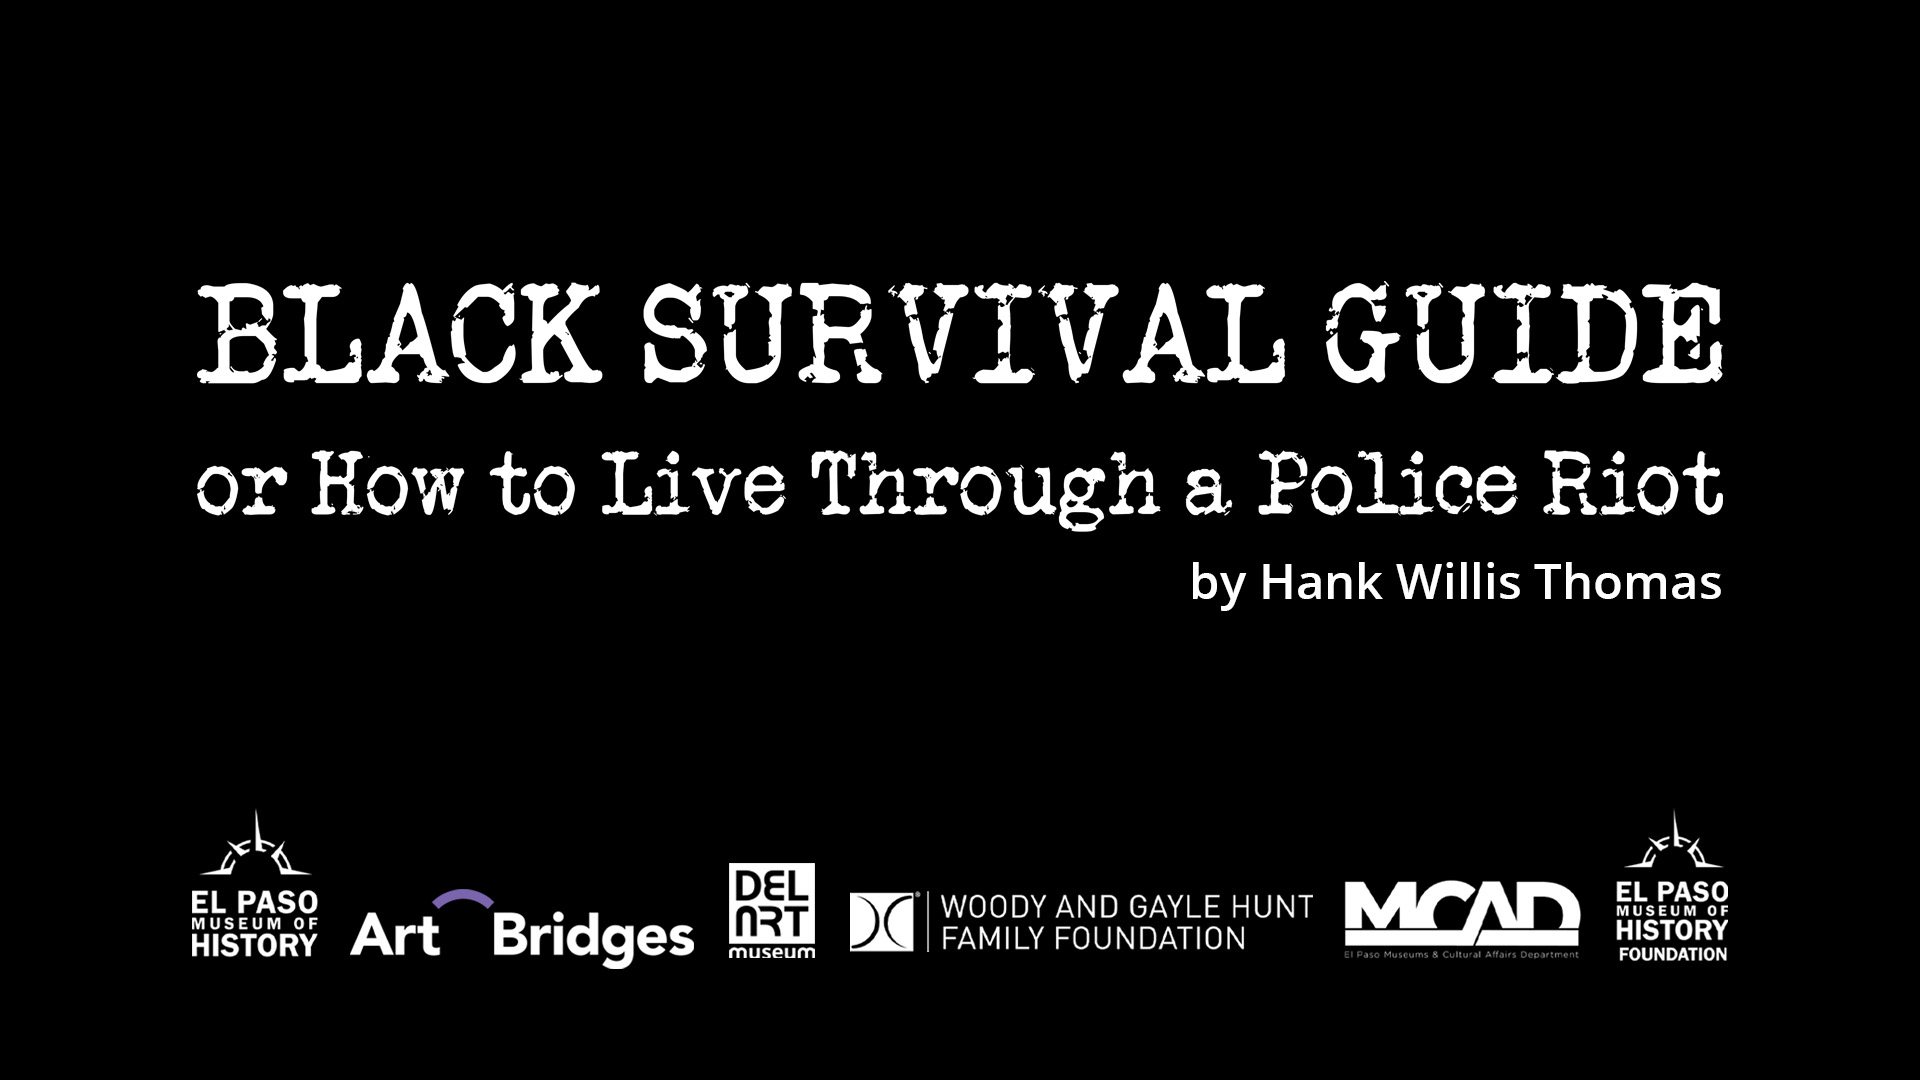 Black Survival Guide, or How to Live Through a Police Riot